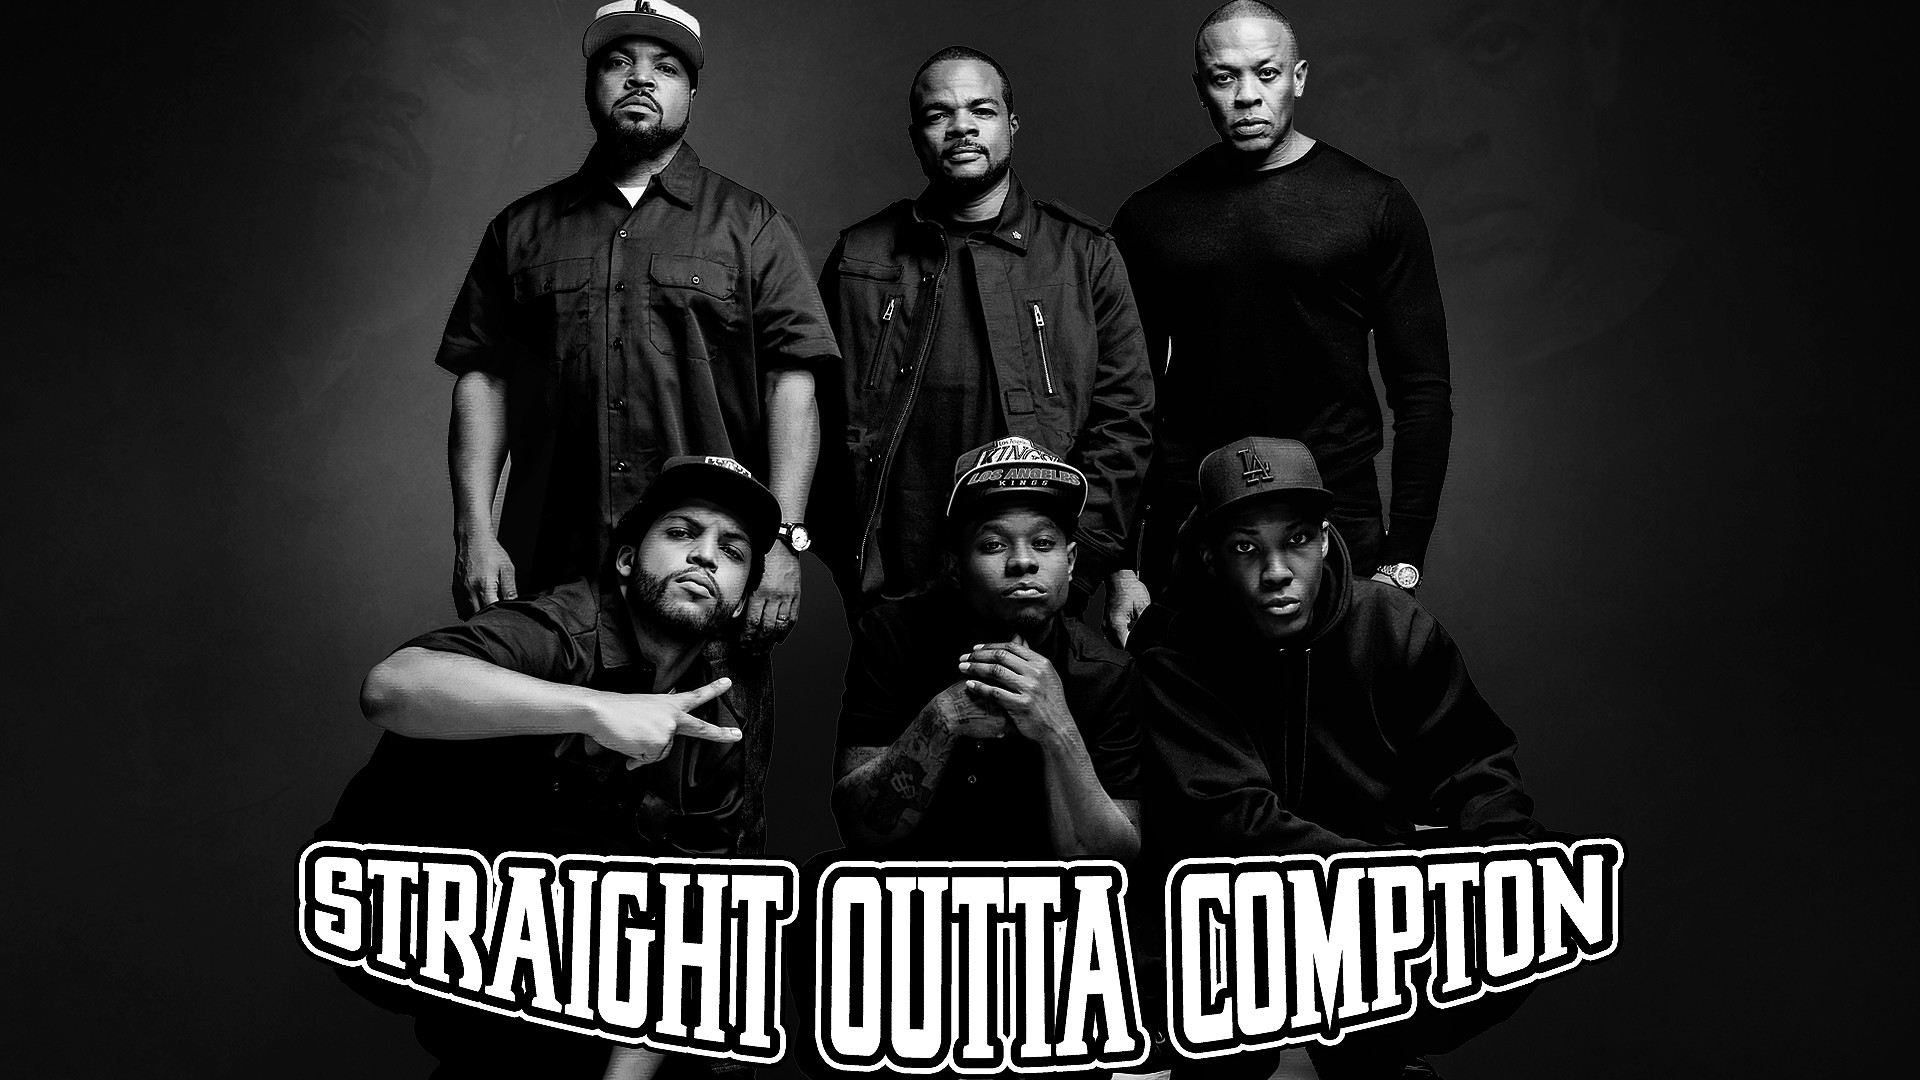 1920x1080 1024x1024 Straight Outta Compton #775779 | Full HD Widescreen wallpapers  for .